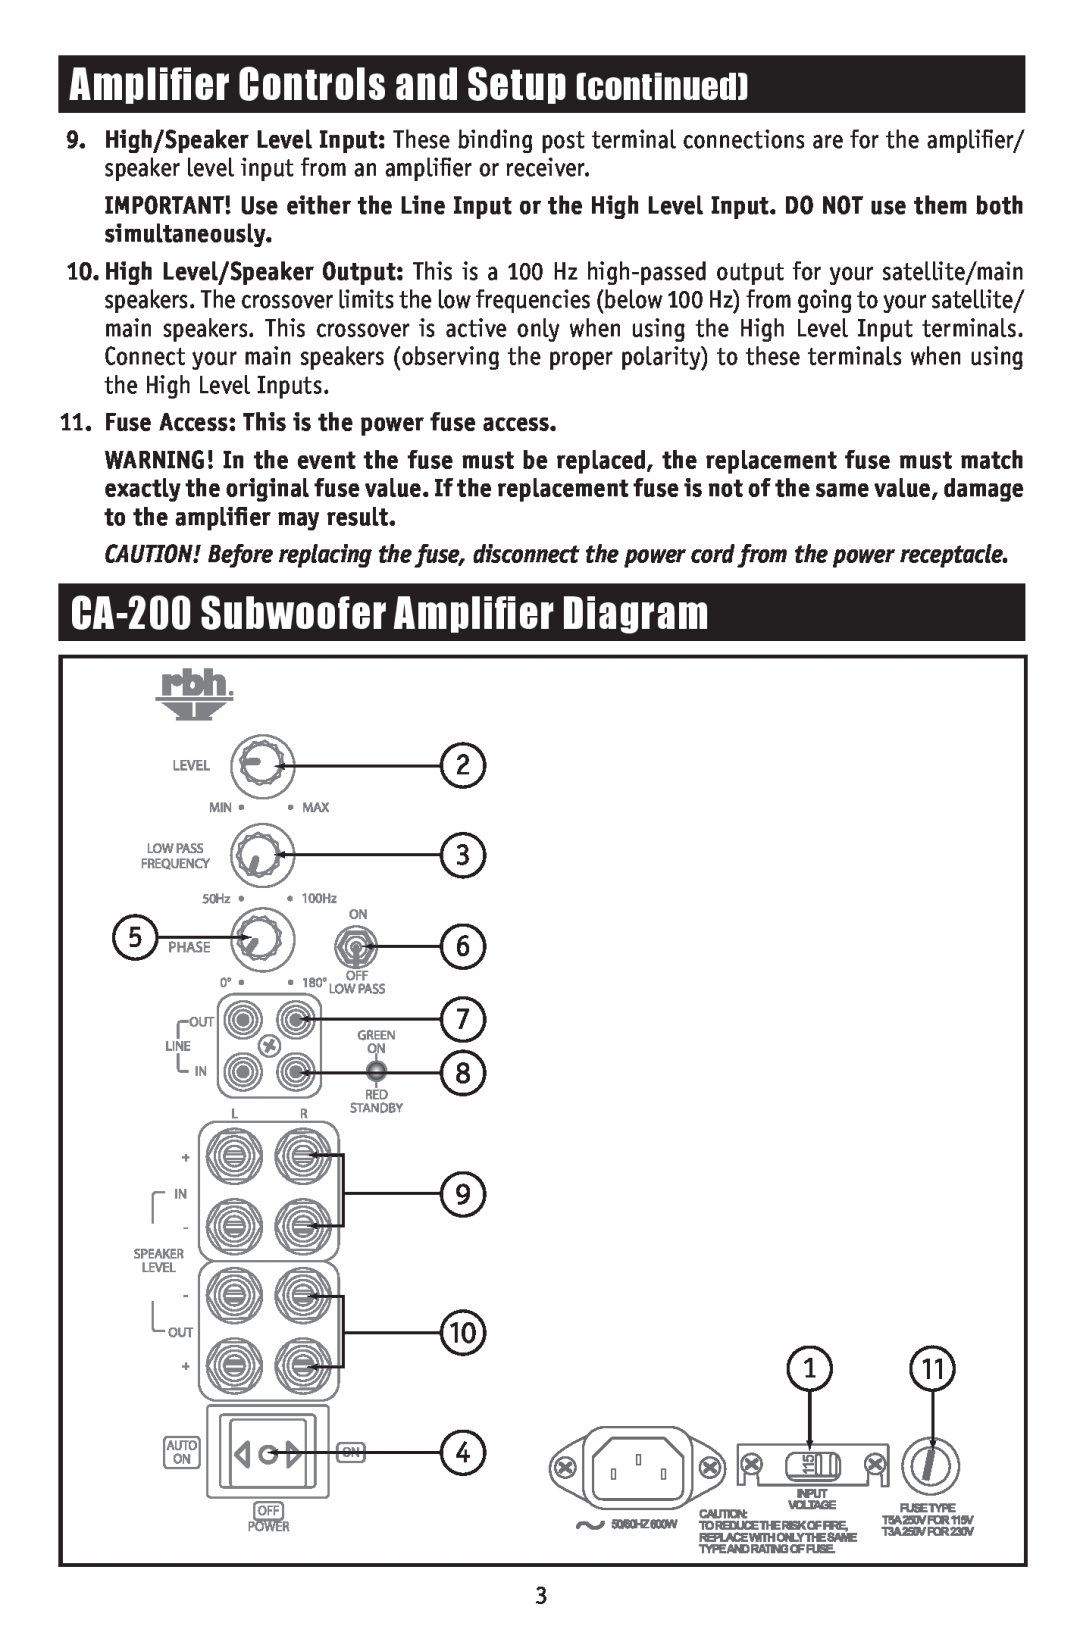 RBH Sound owner manual CA-200Subwoofer Amplifier Diagram, Amplifier Controls and Setup continued 